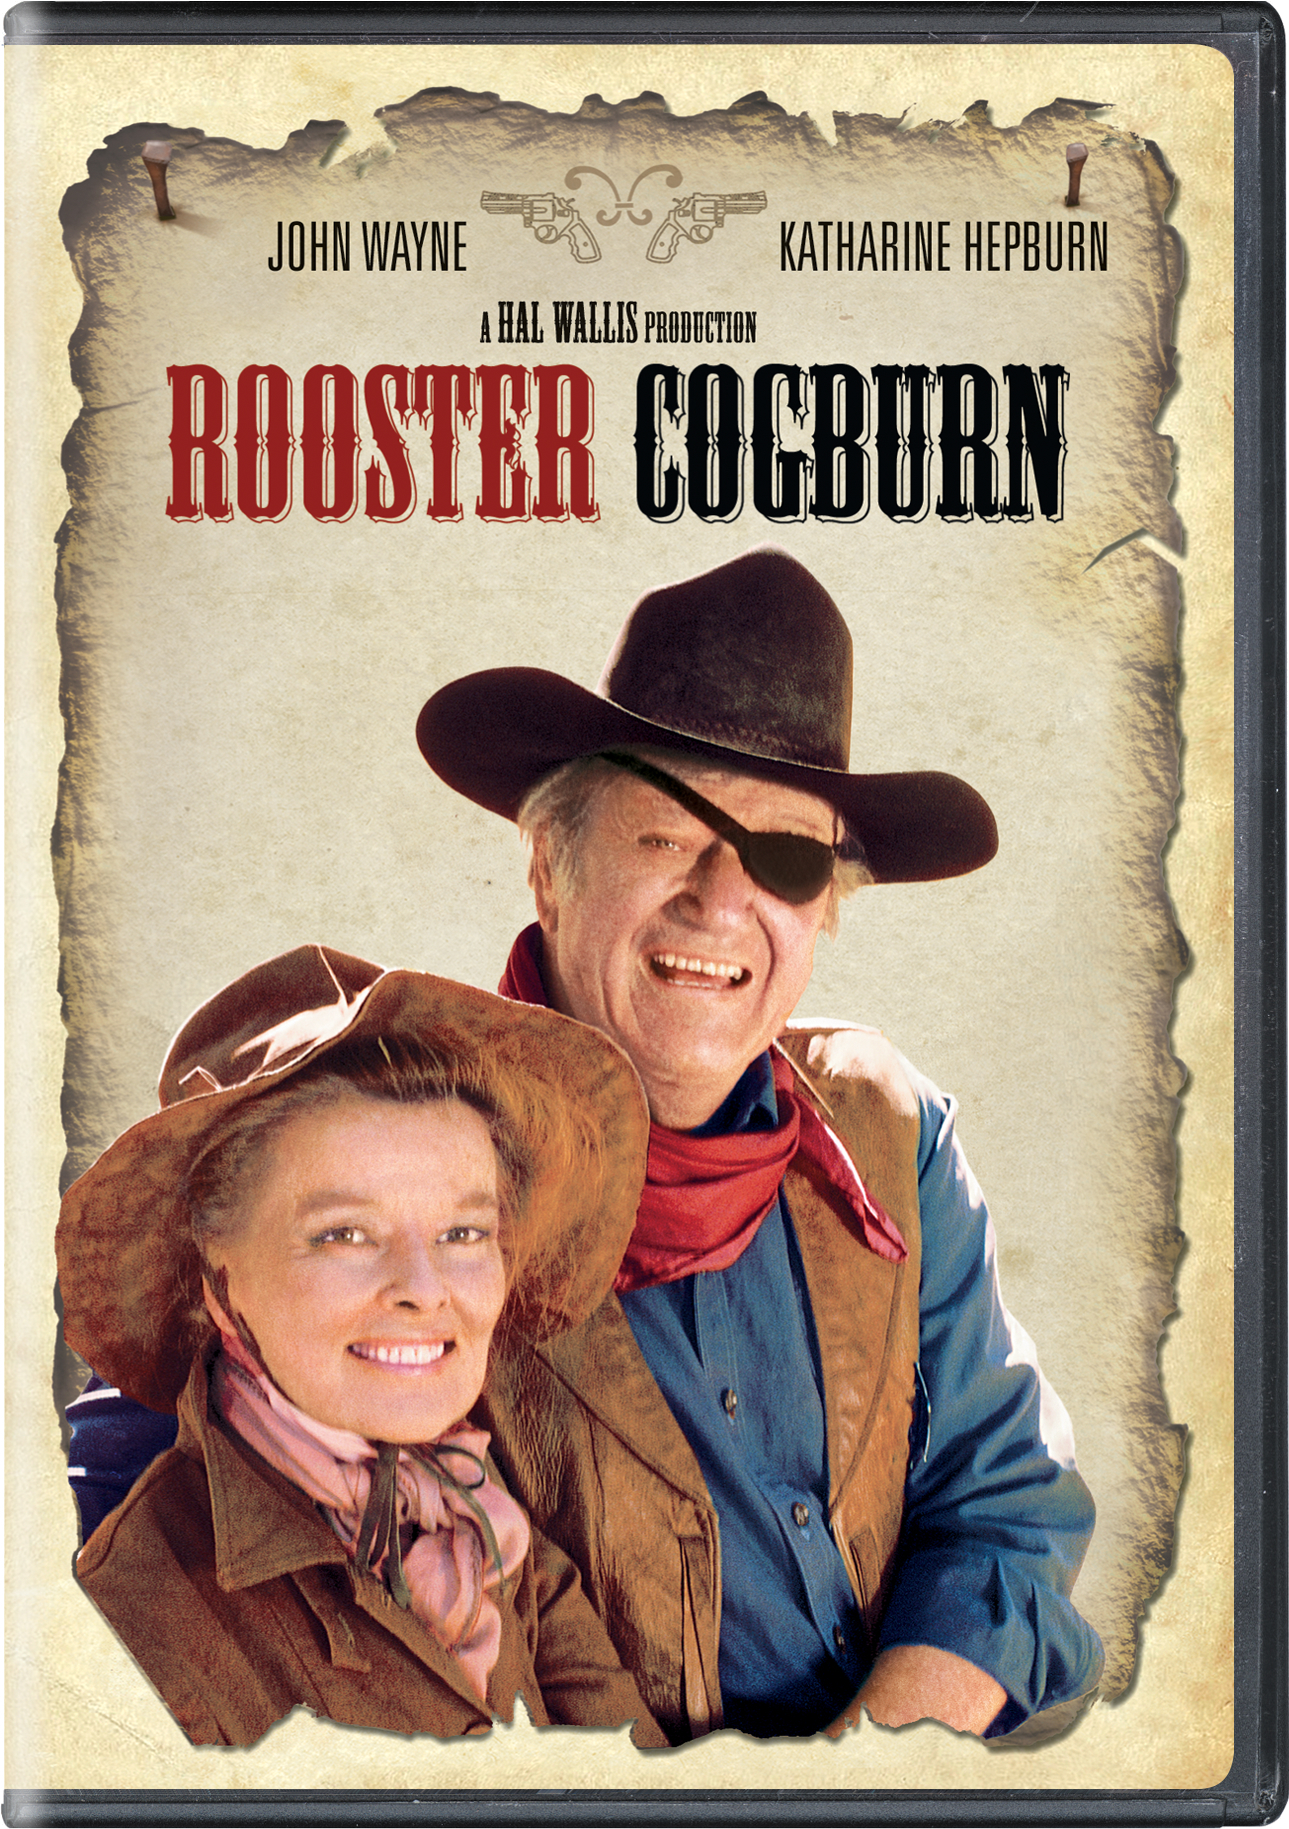 Rooster Cogburn - DVD [ 1975 ]  - Western Movies On DVD - Movies On GRUV